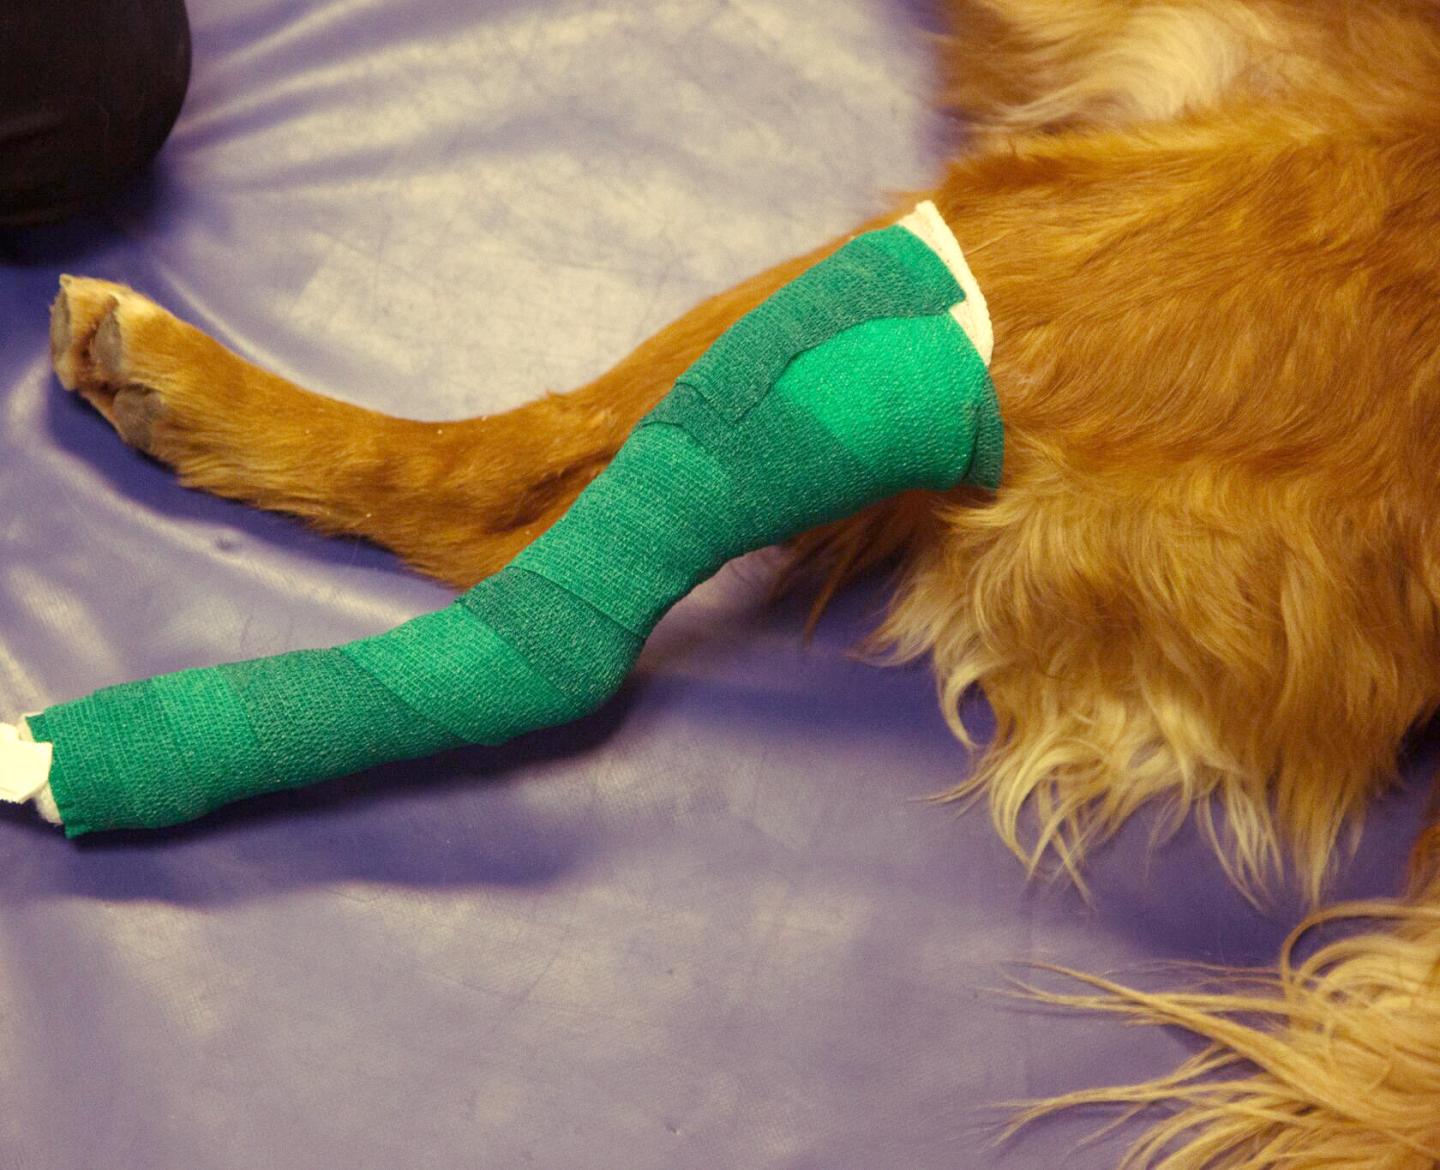 A Dog Wears a Long Cast On One of its Hind Legs to Test How Much Pressure is Exerted